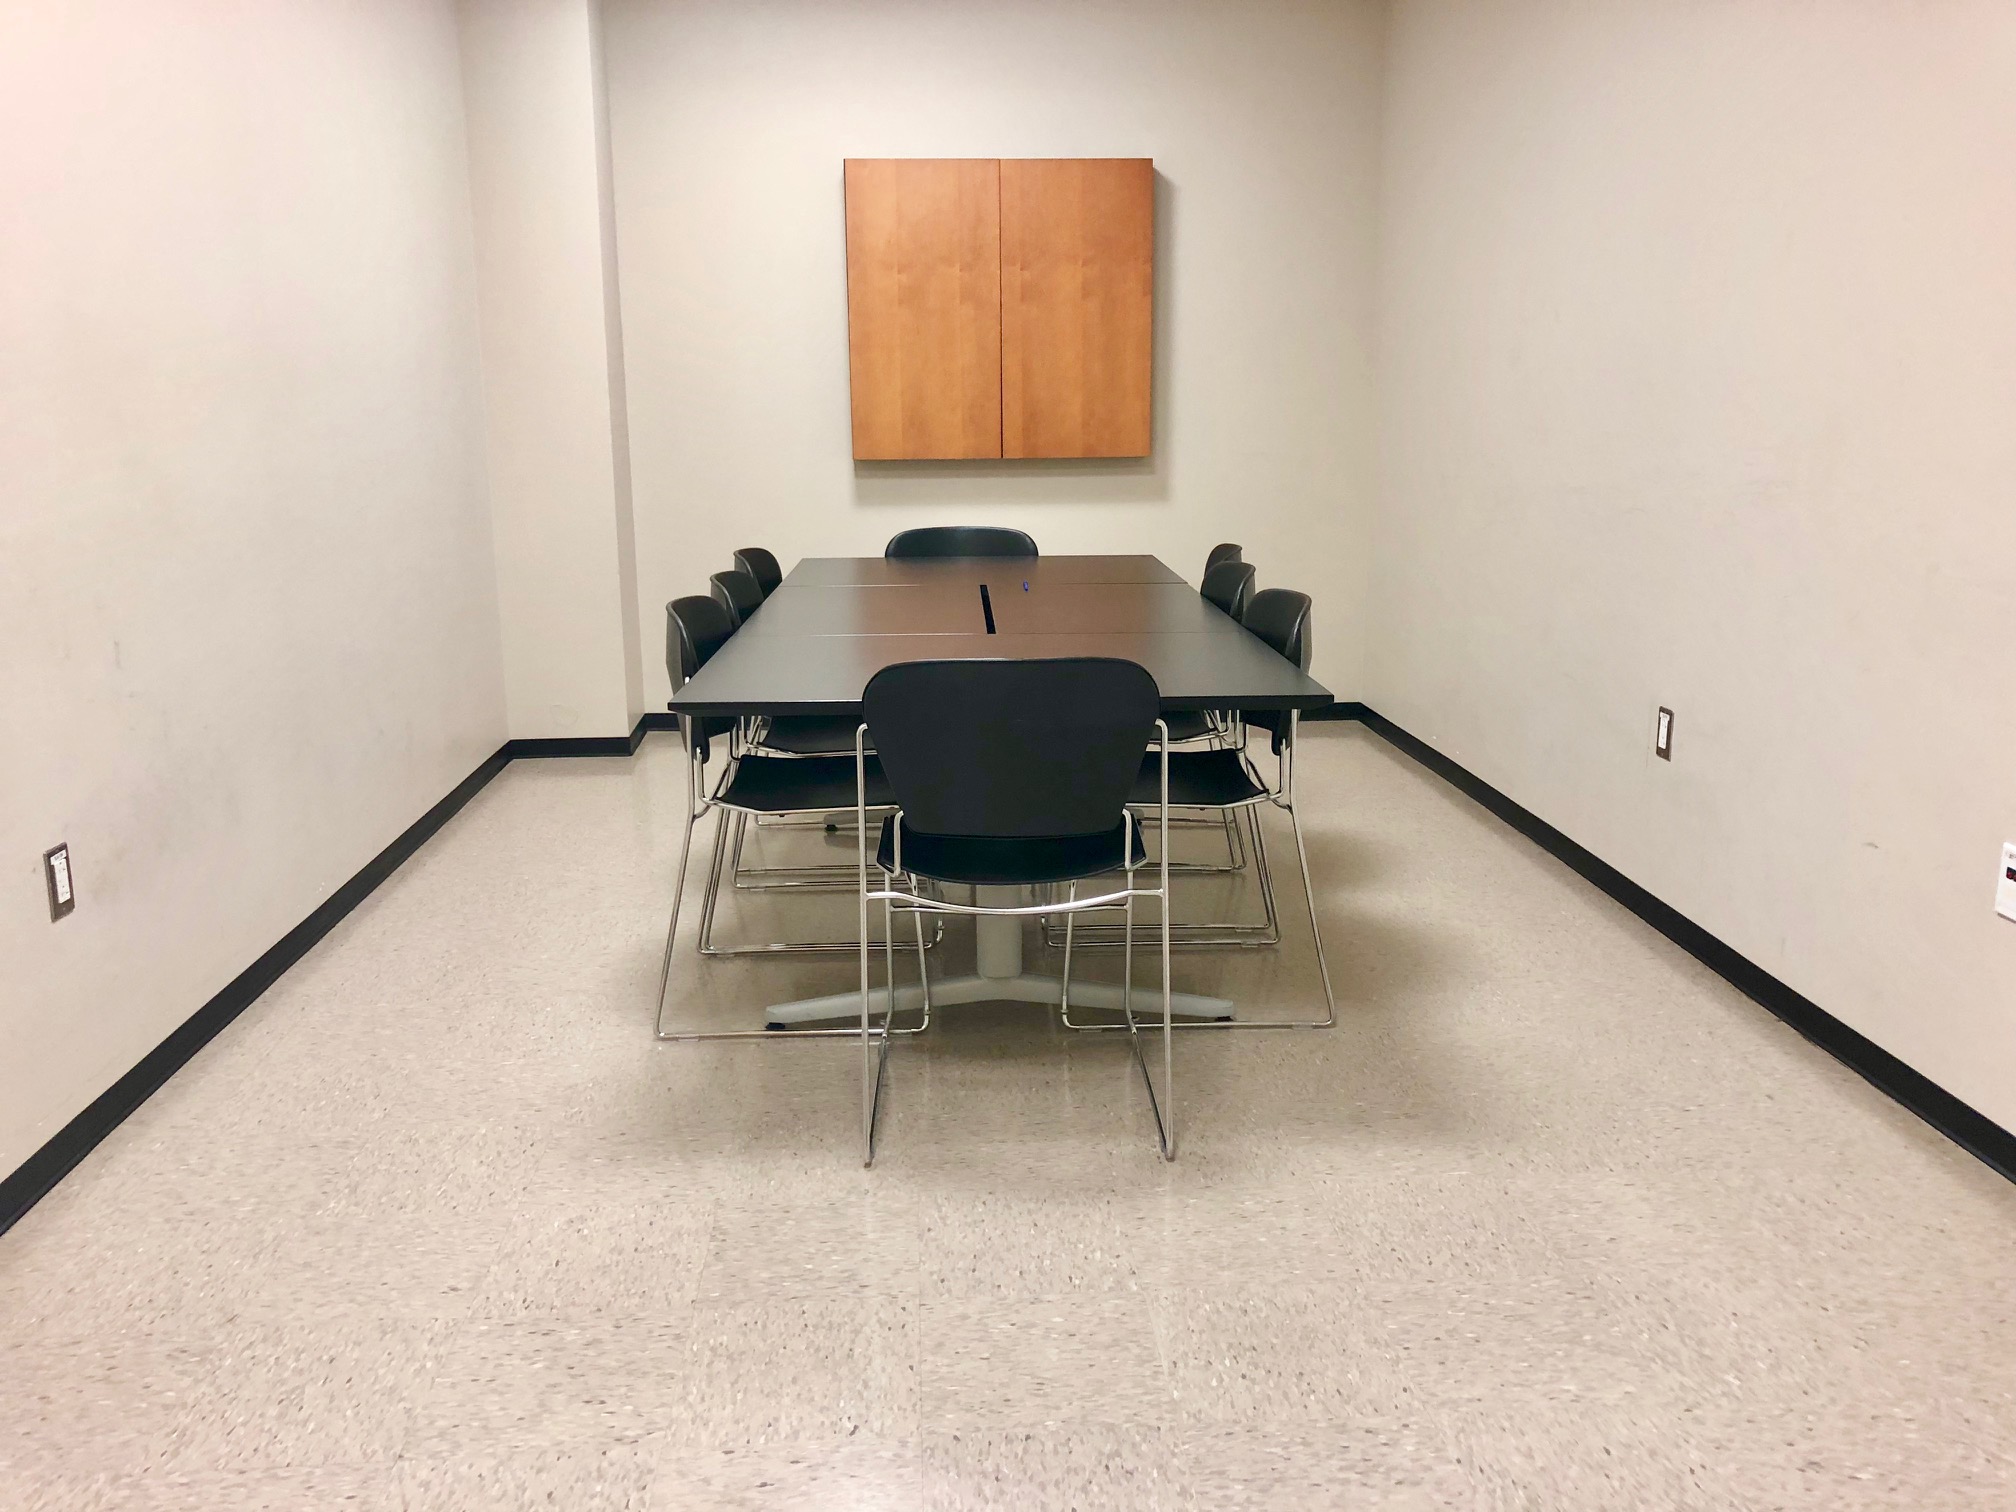 Conference Room #2 at University Branch Library